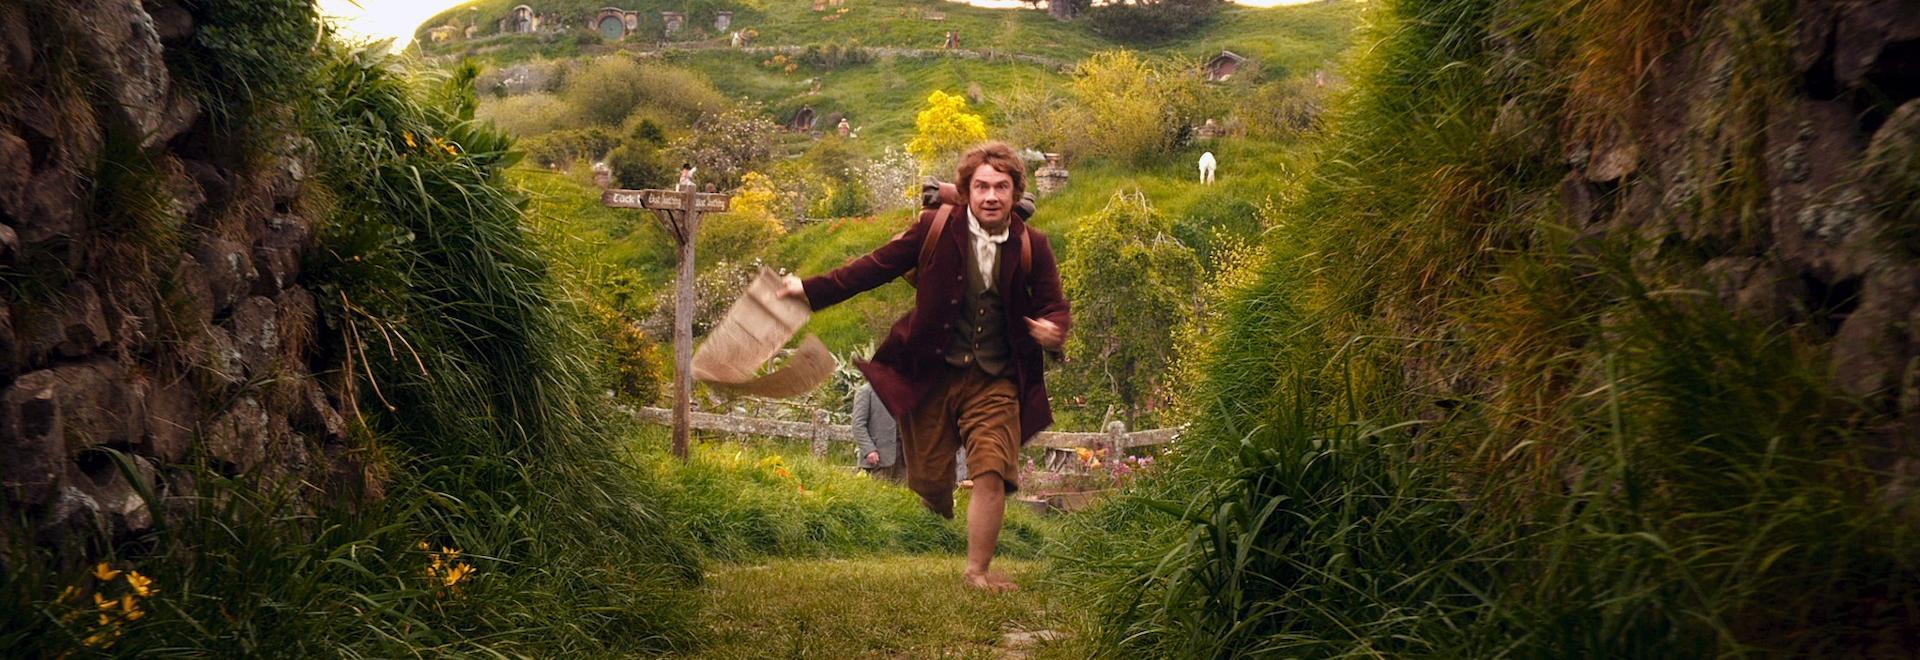 The Hobbit Trilogy Filming Locations: A New Zealand Adventure